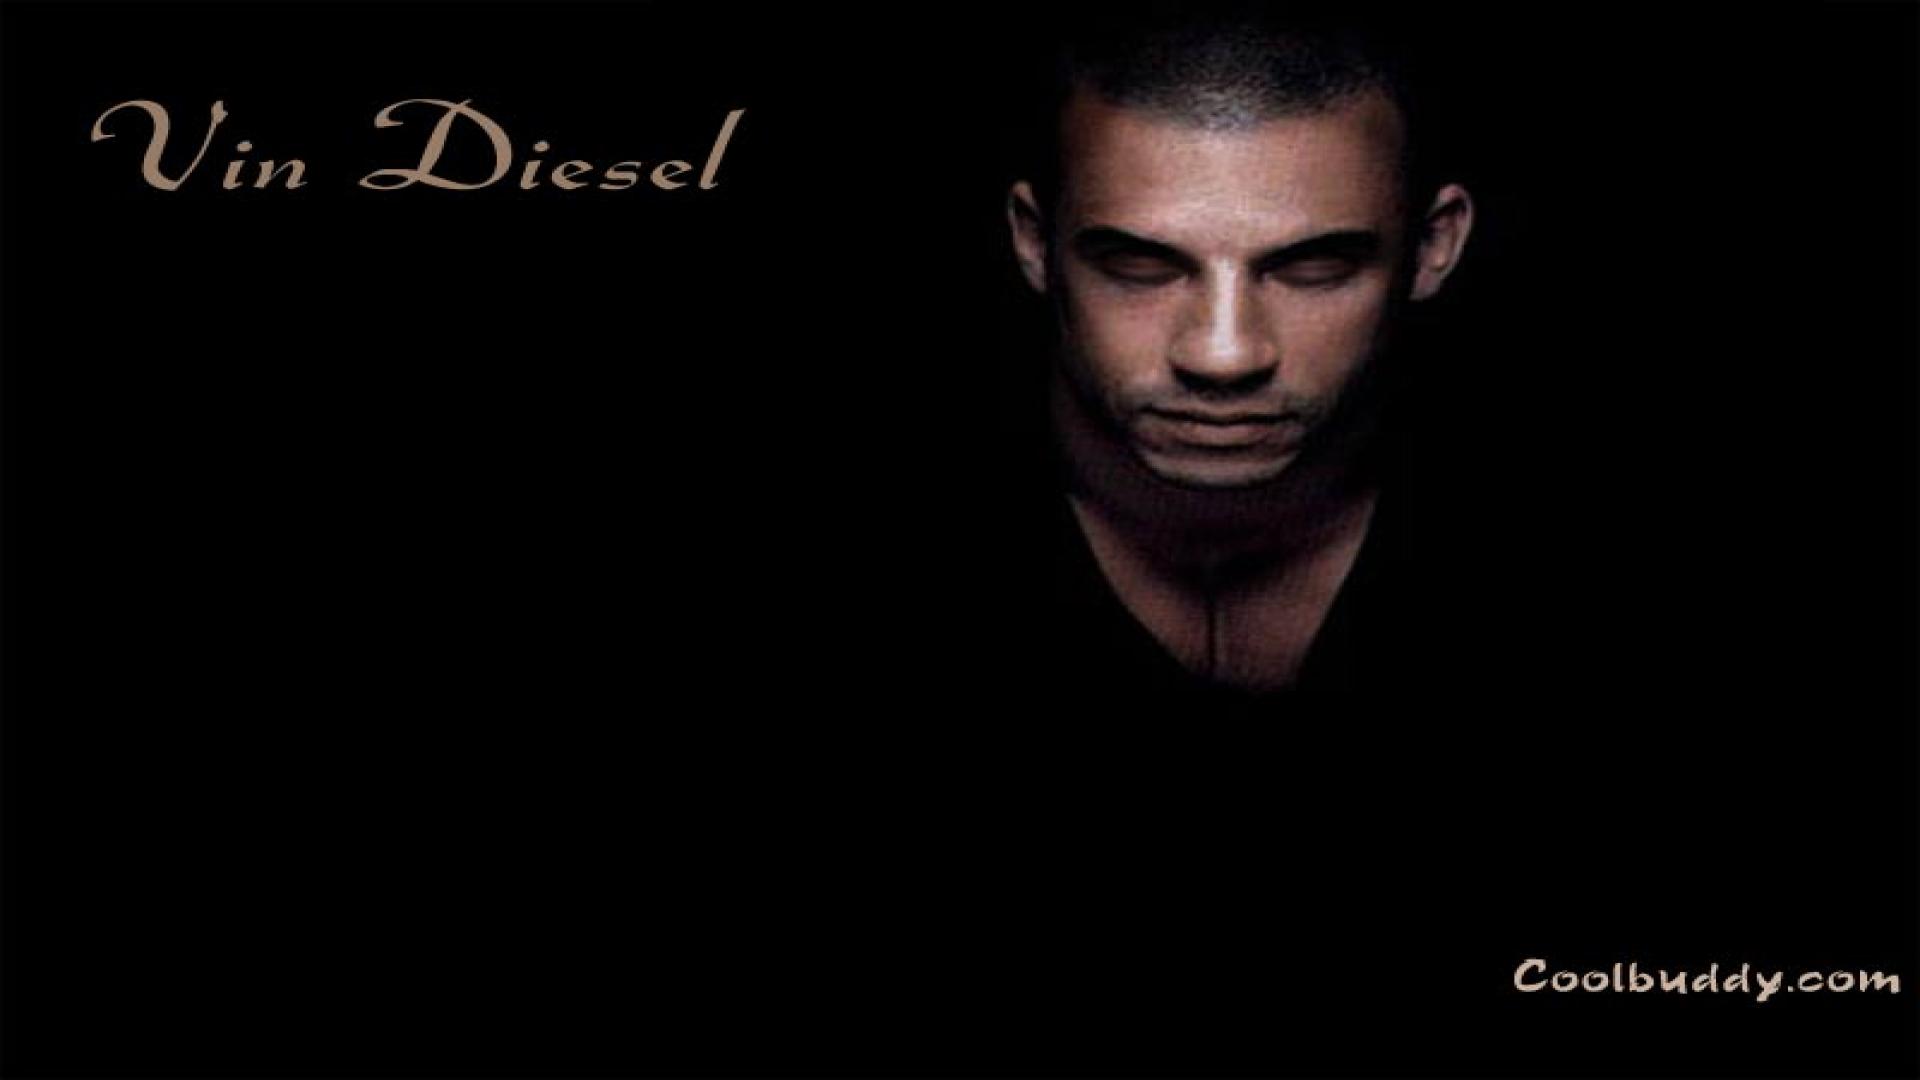 You Can Vin Diesel Black Wallpaper In Your Puter By